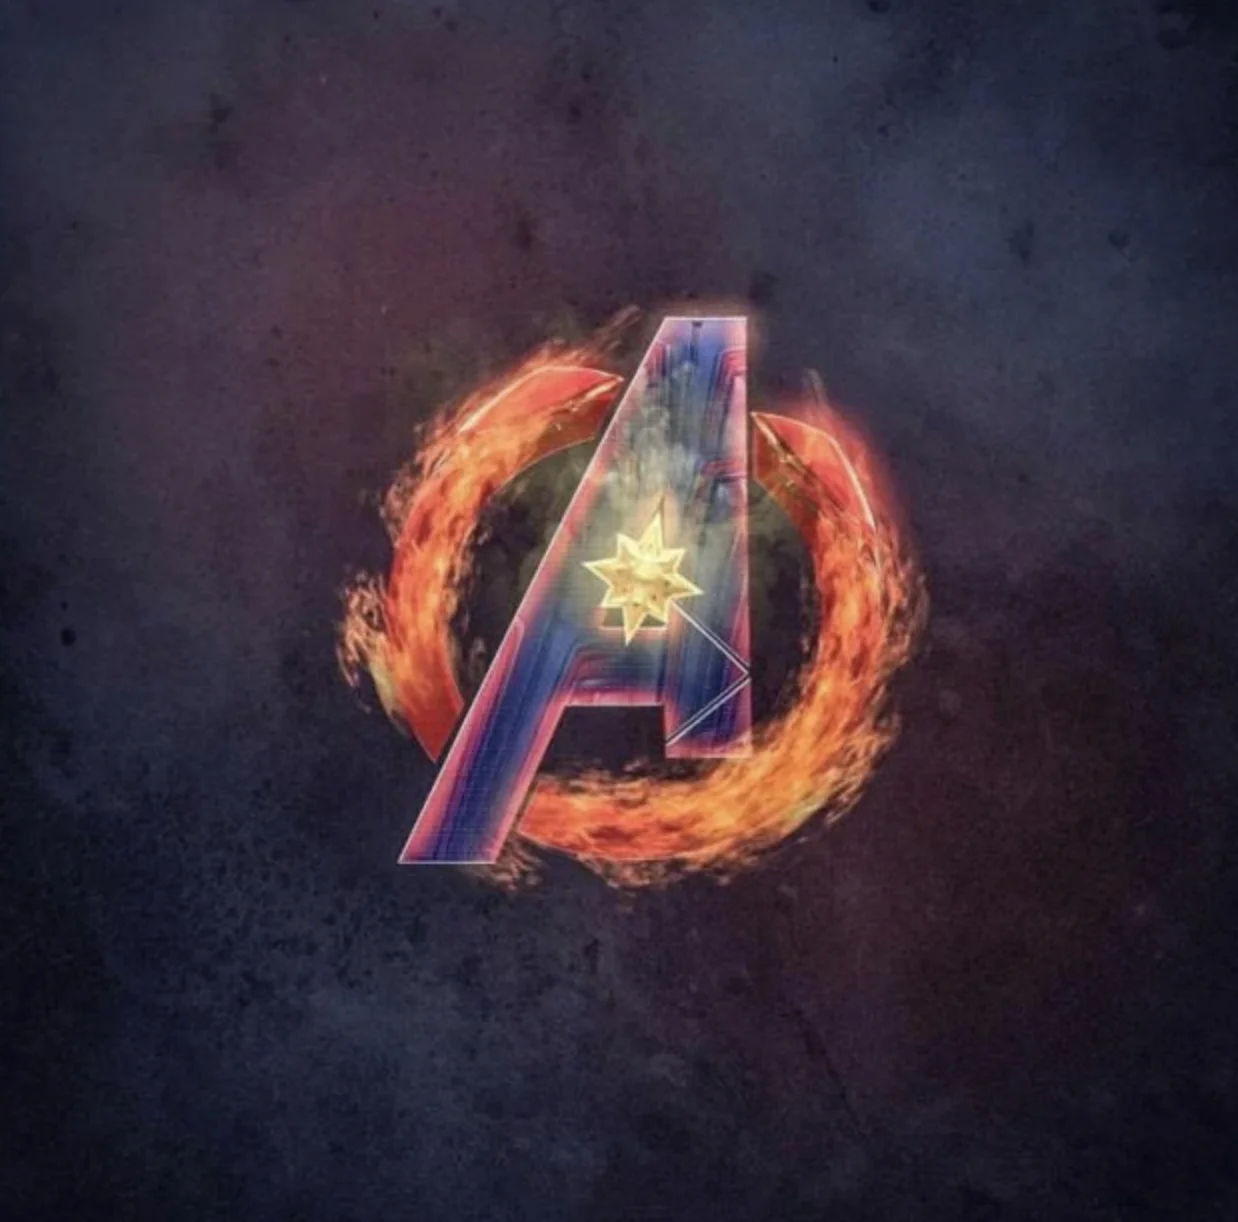 "Avengers: Endgame": Avengers logo with the personal characteristics of Marvel heroes